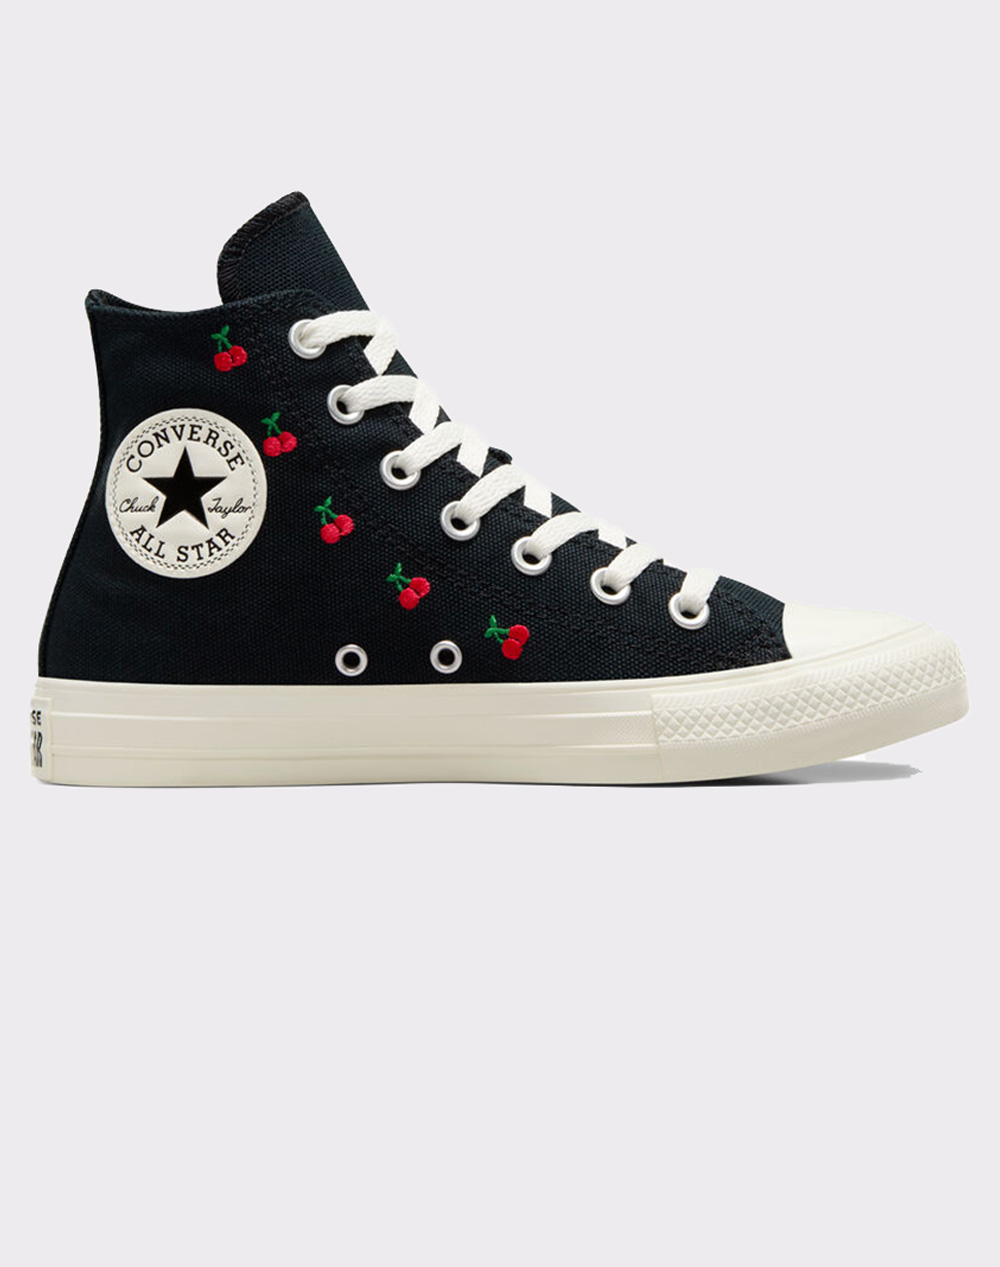 CONVERSE ΠΑΠΟΥΤΣΙΑ SNEAKERS HIGH TOP SNEAKERS A08142C-001 Black